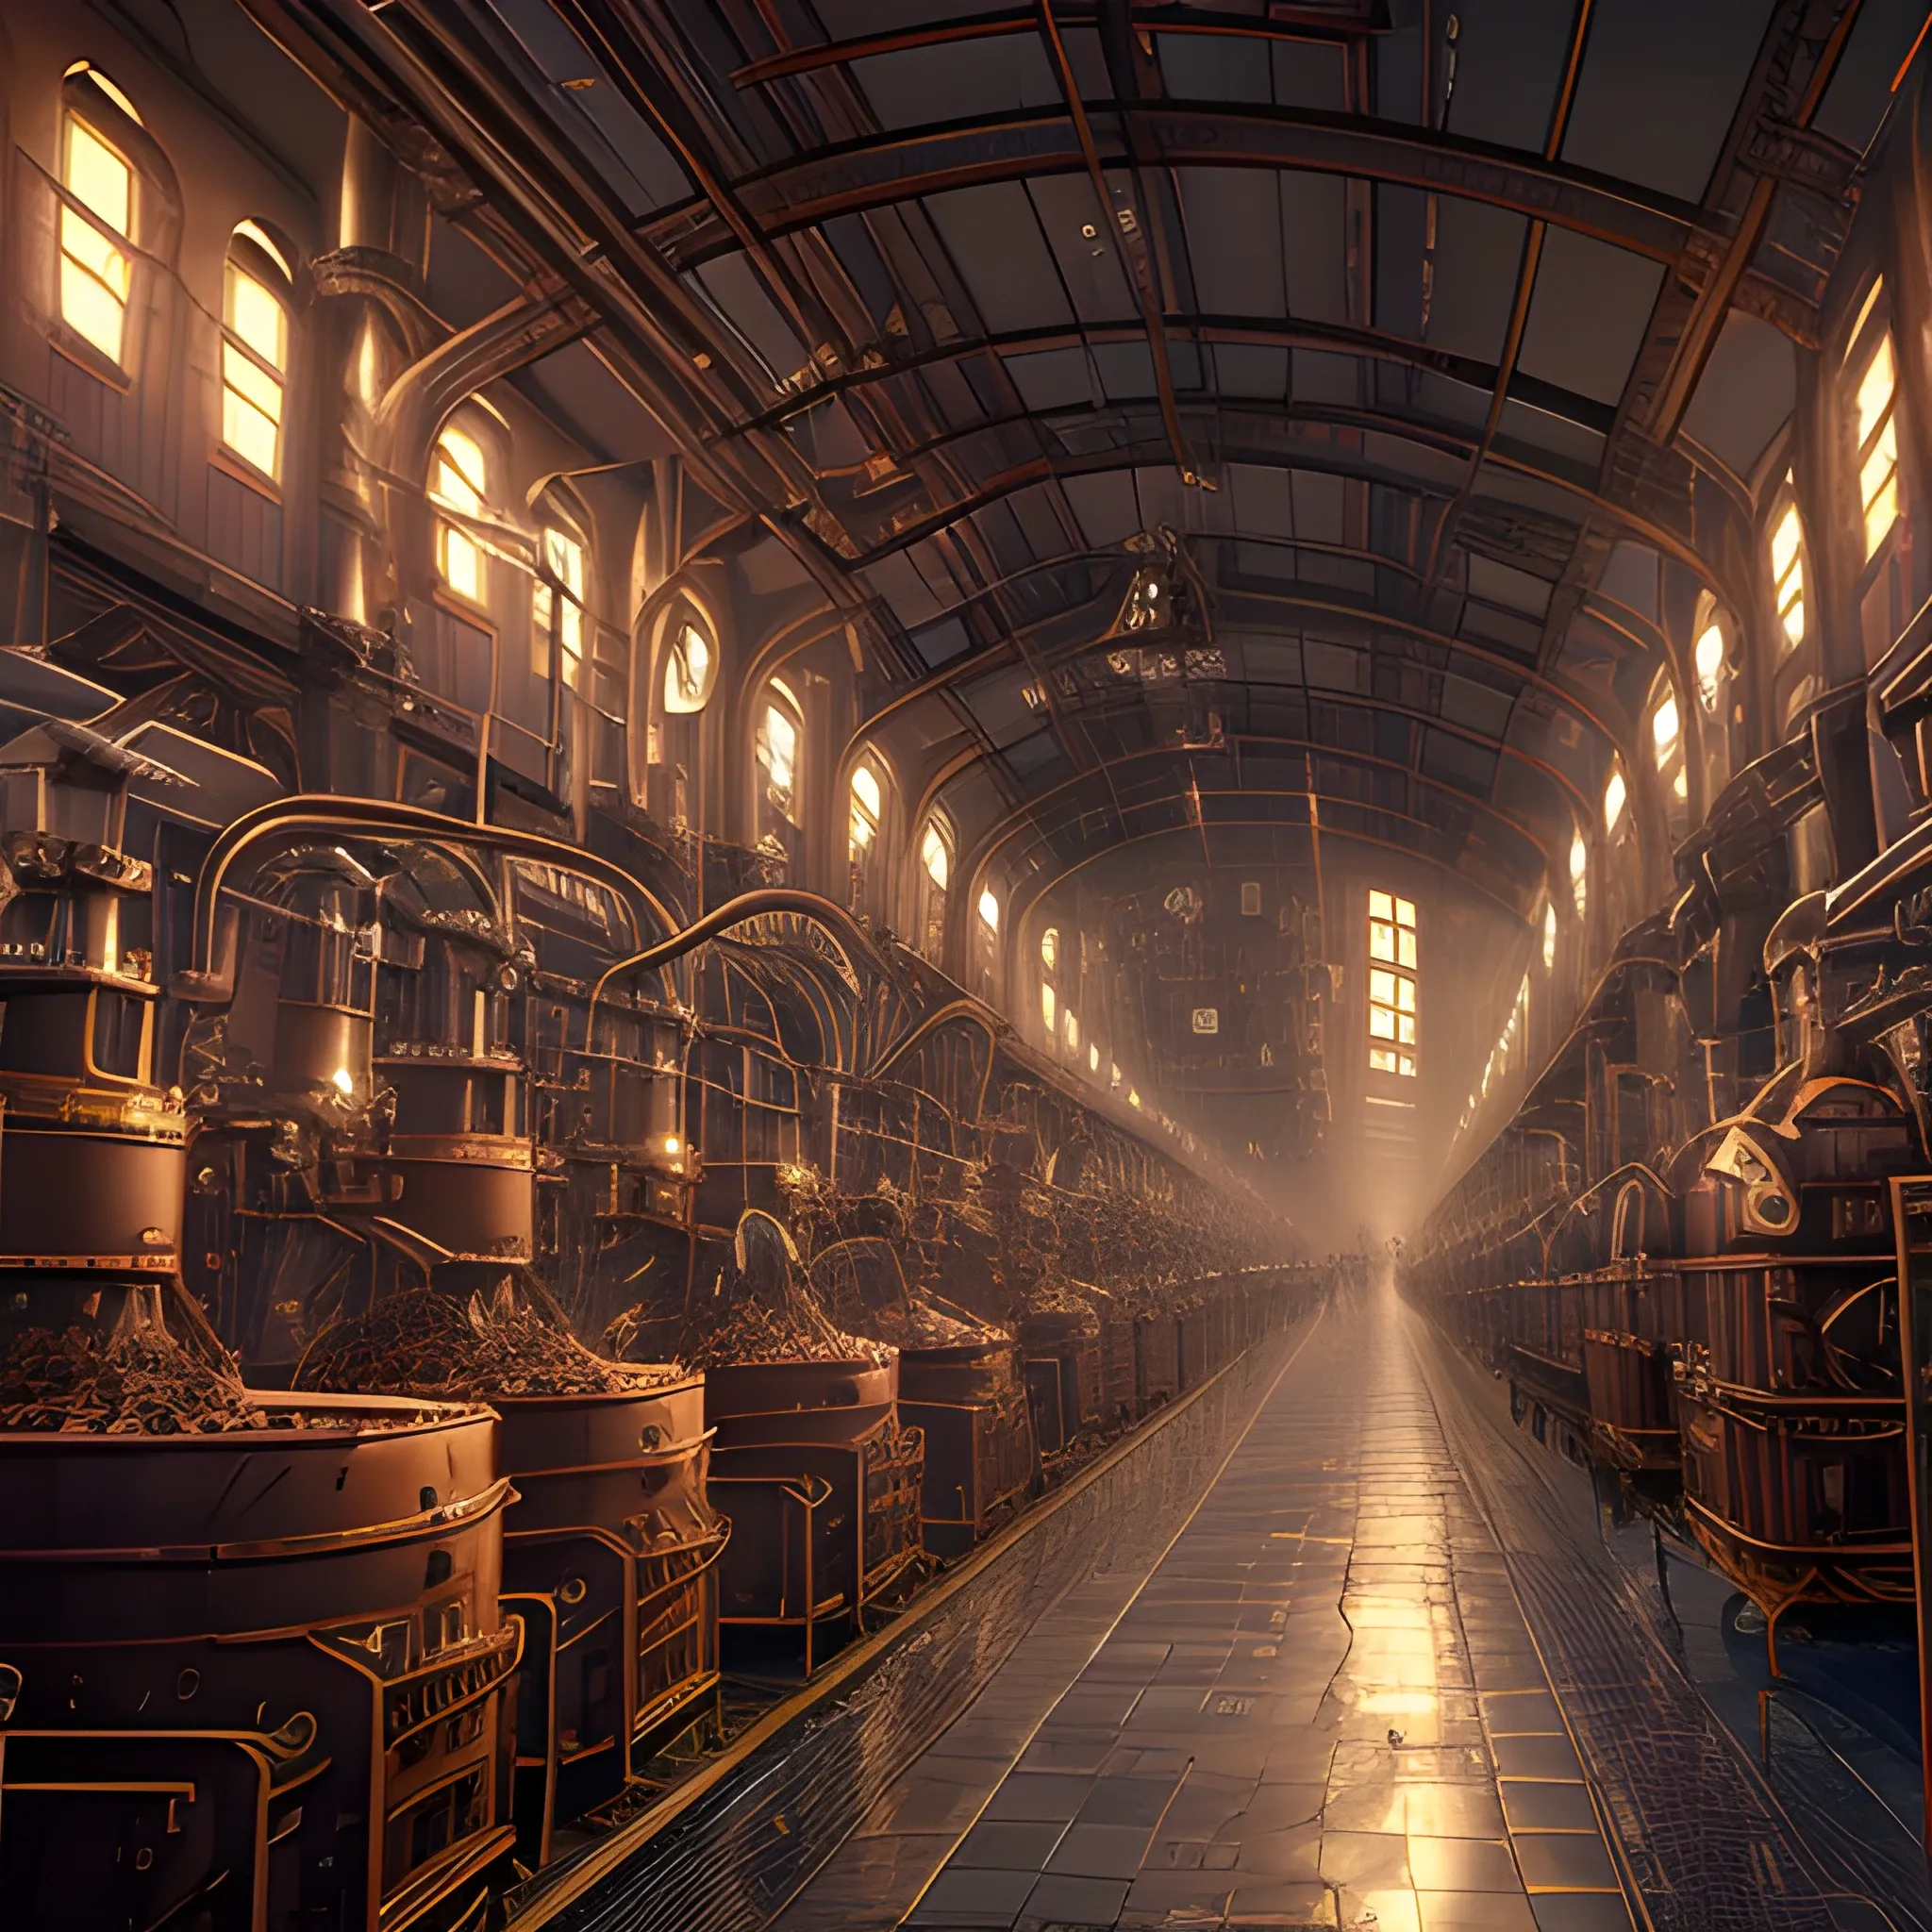 8k, Masterpiece, steampunk chocolate factory overflowing with liquid chocolate, chocolate assembly lines, matte, award-winning, cinematic quality, photorealism
